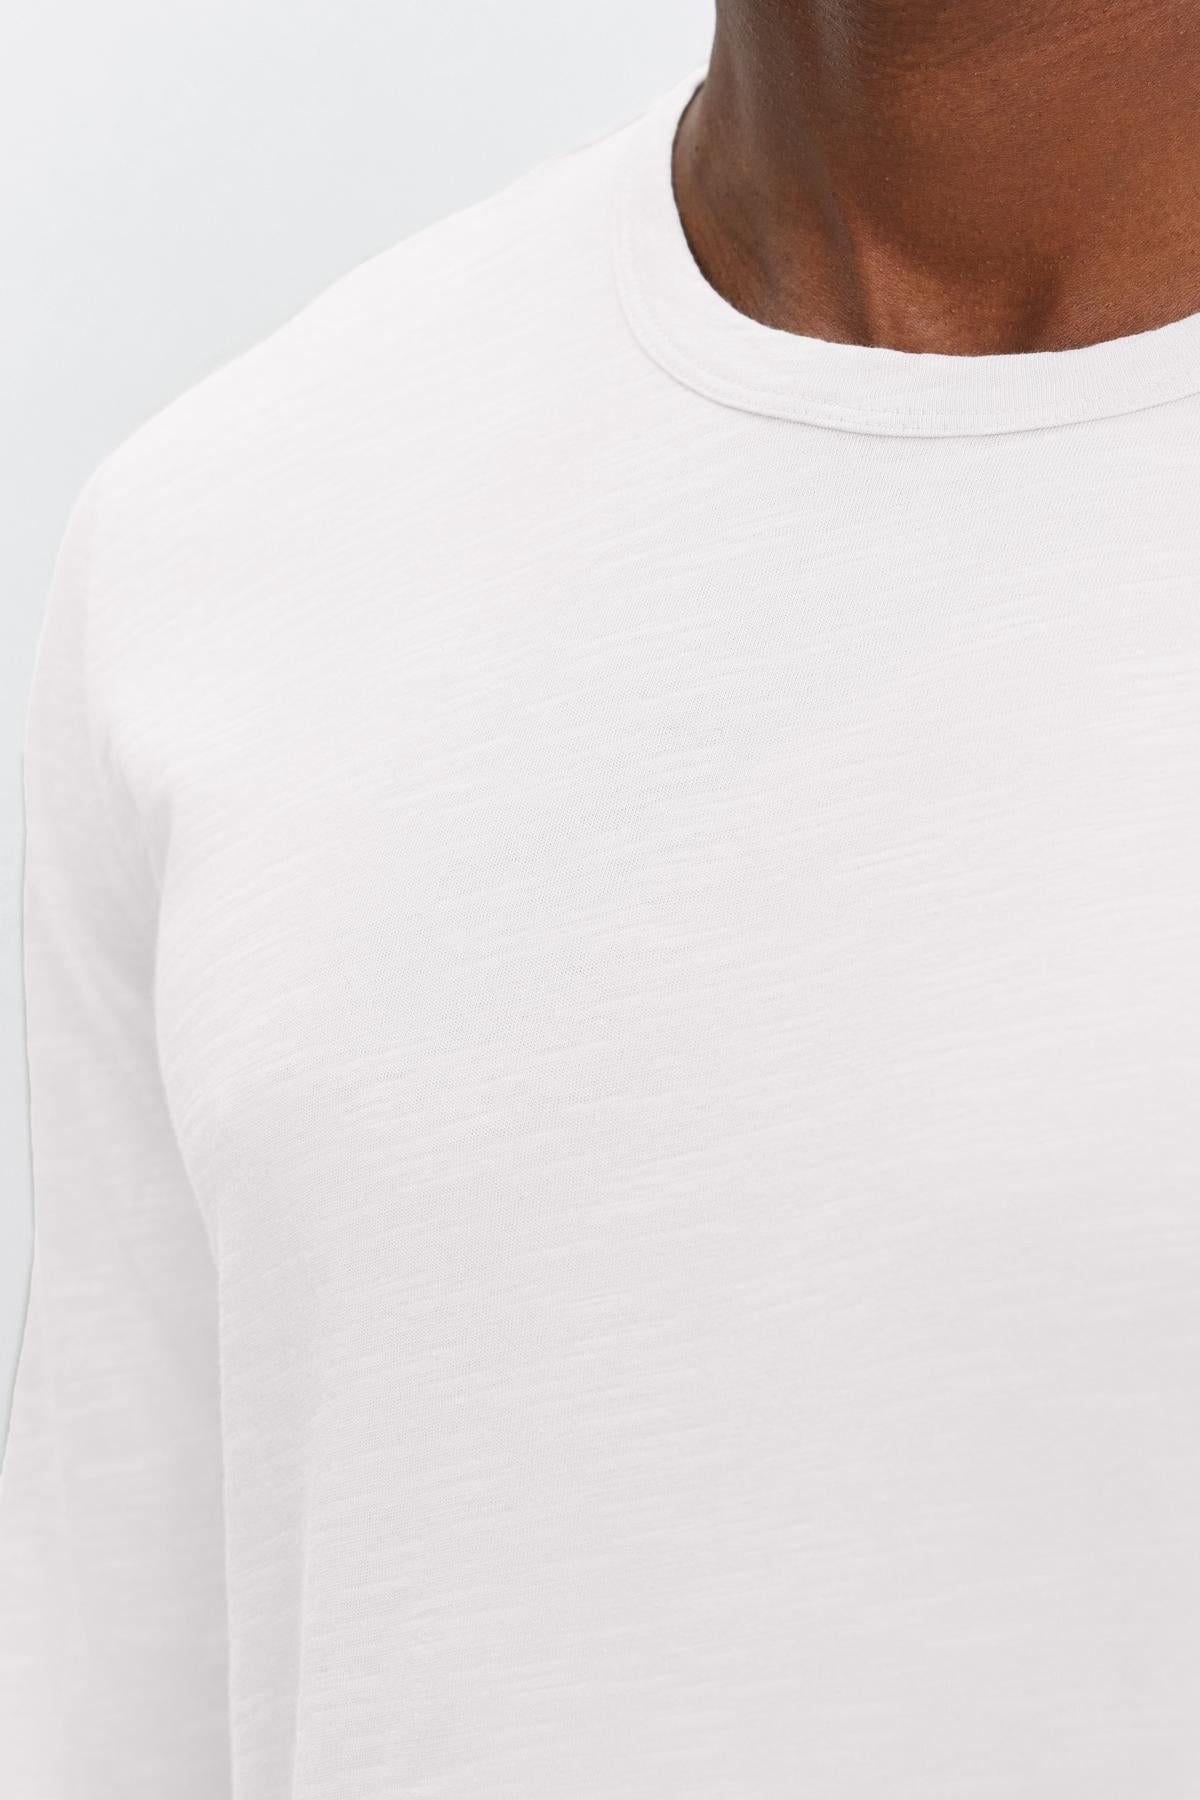   Close-up of a man wearing a Velvet by Graham & Spencer KAI CREW NECK TEE, focusing on the shoulder and neck area against a light background. 